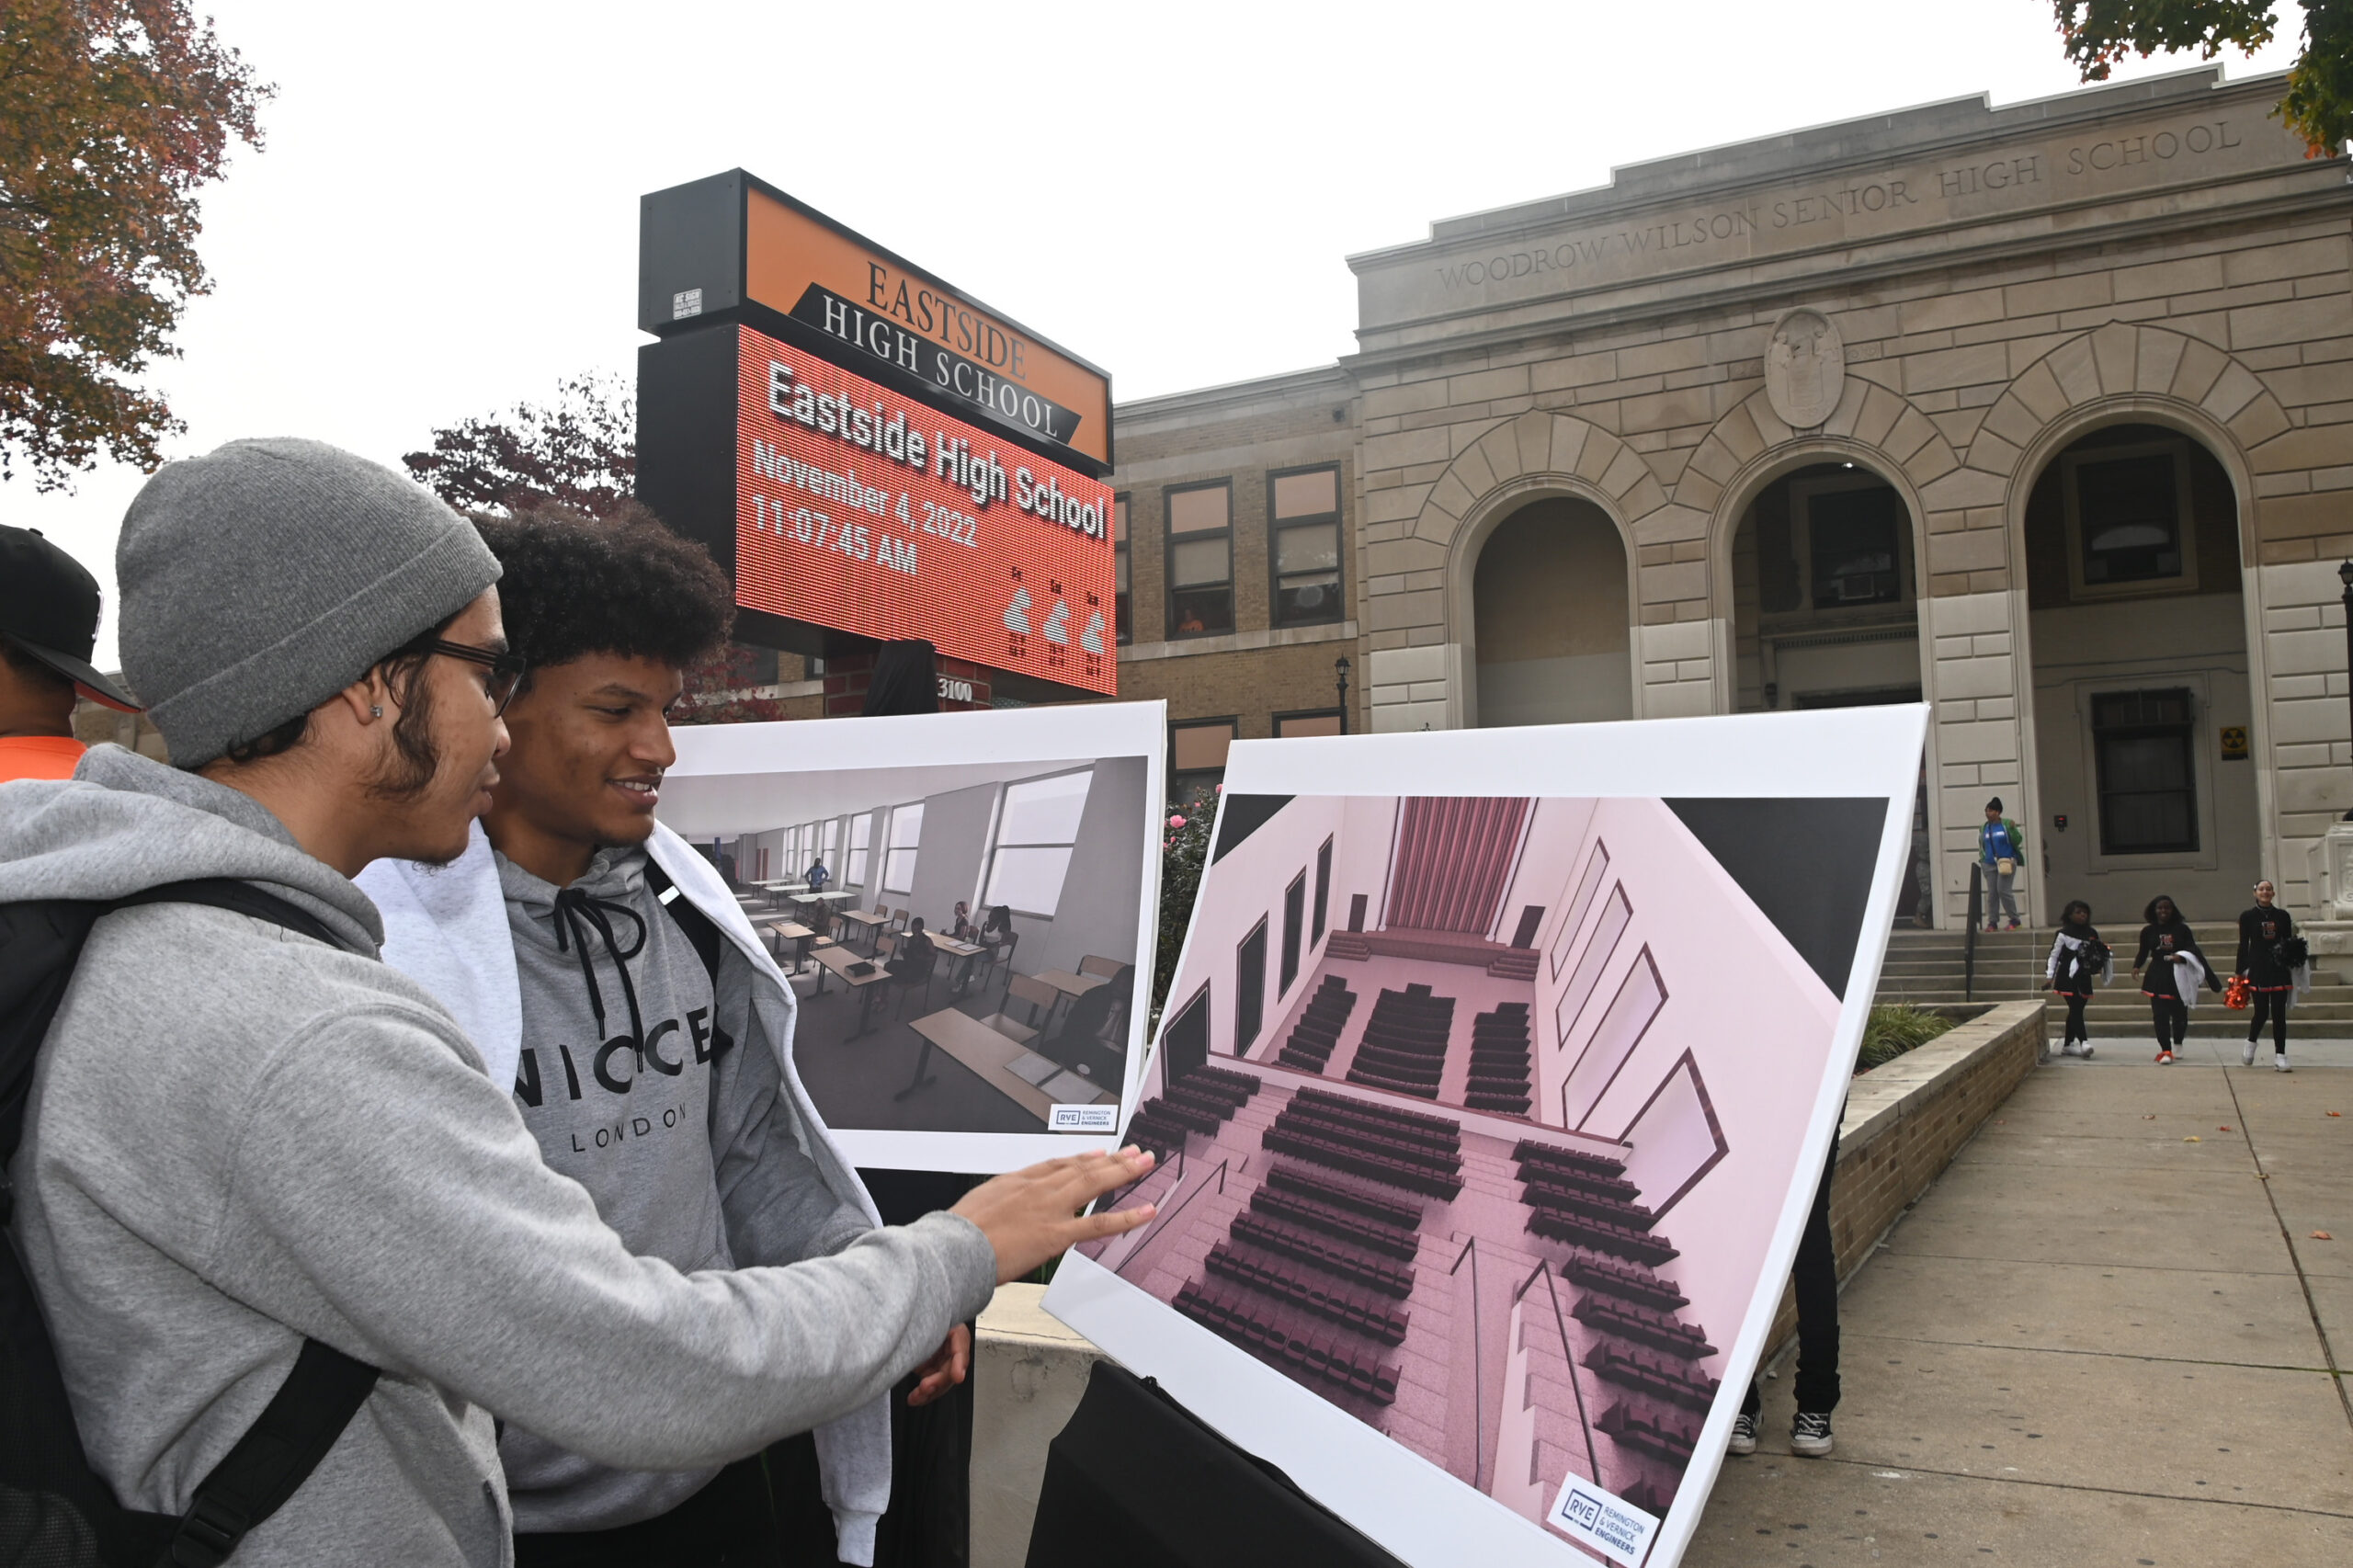 Camden Eastside HS juniors Elijah Jimenez (left), and Cristian Cabrera, look over architectural renderings of some of the planned $41million grant announced Friday.  They're in front of the the  school building on Federal St. in Camden, NJ, on Friday, Nov. 4, 2022. The electronic sign is part of the upgrades.